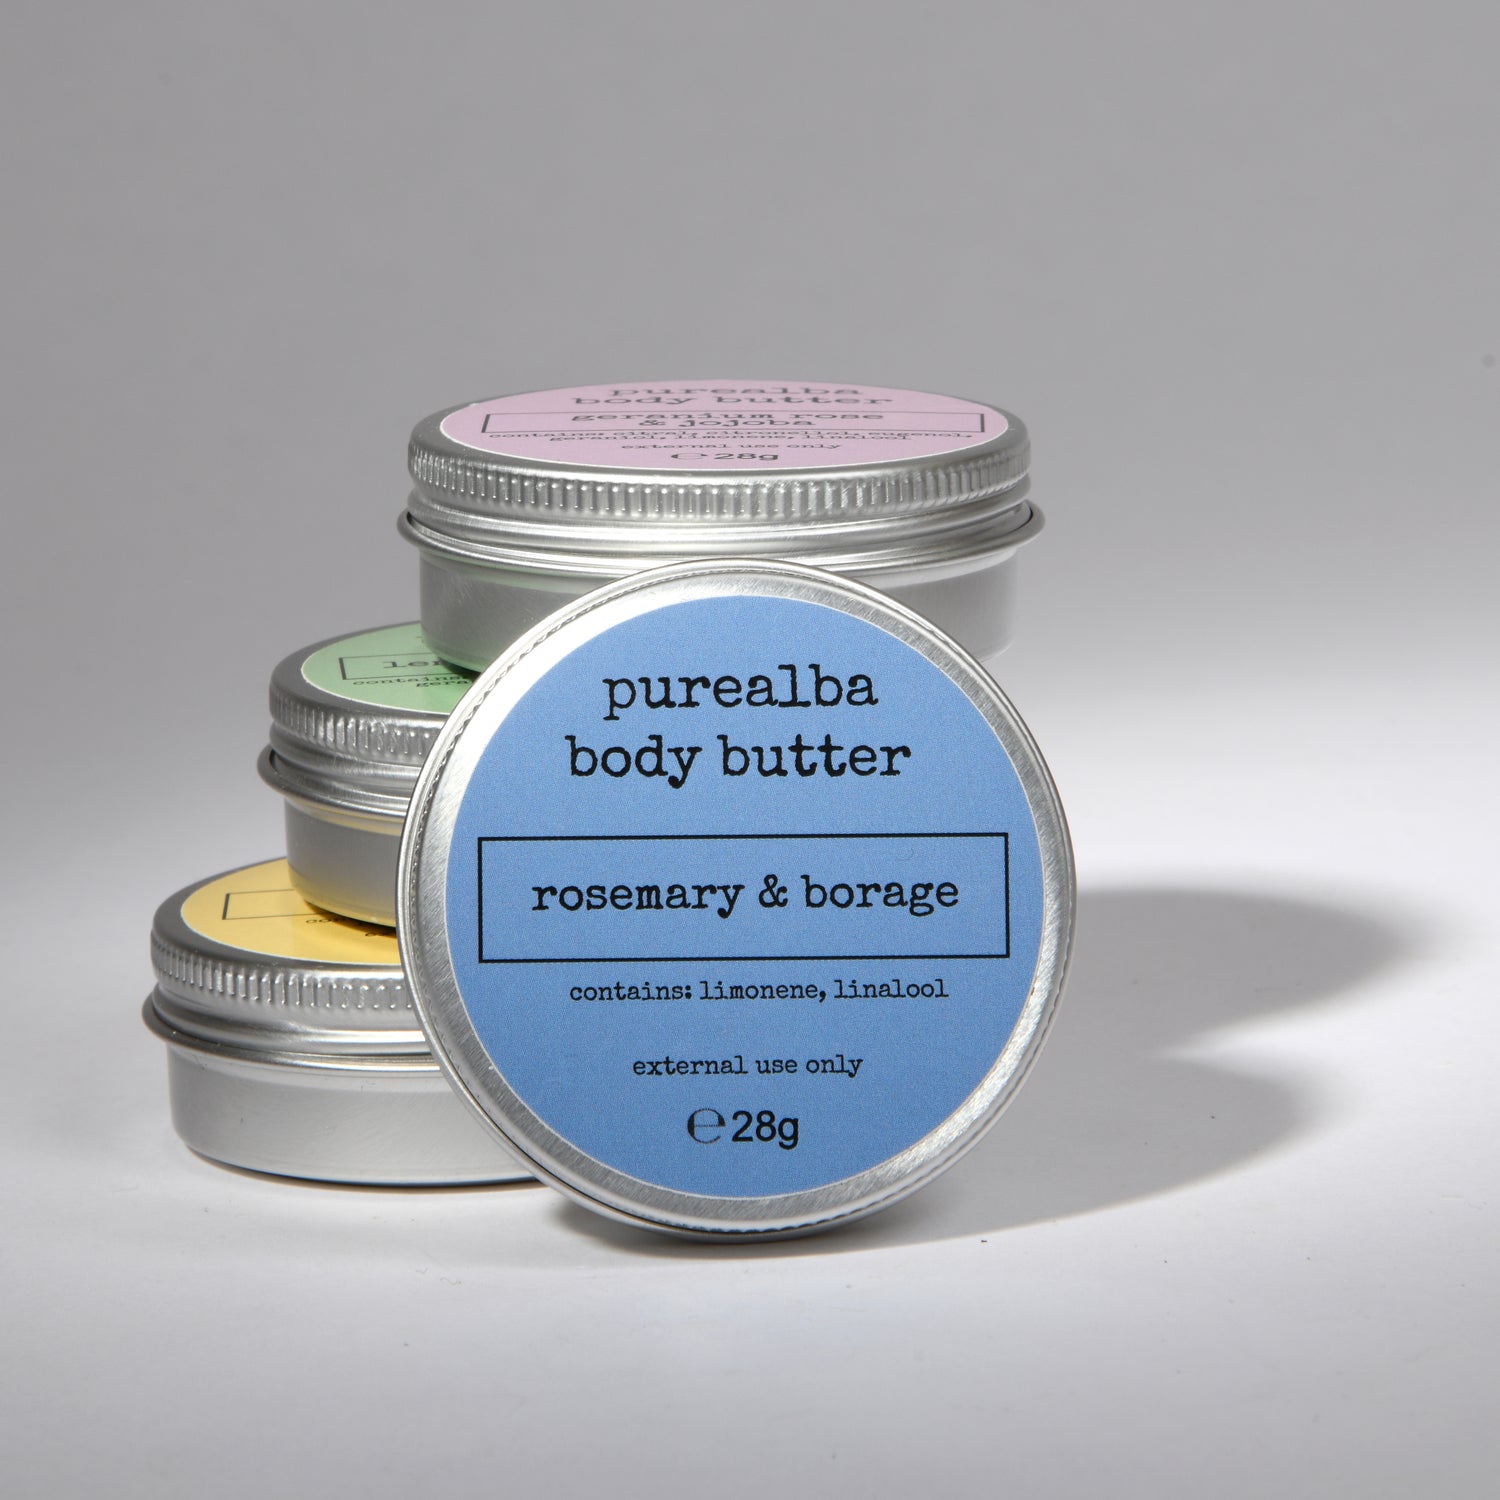 With the slightly medicinal scent of organic rosemary essential oil this rich body butter is fresh and stimulating.  Rosemary is known for its benefits to the immune system and can help ease headaches and reduce puffiness of the skin. It is said to soothe inflammation and stimulate circulation.  Borage oil has been used traditionally to help ease the symptoms of psoriasis, it is high in linoleic acid and is anti-inflammatory, acting like your natural oils to protect against flare ups and irritation.